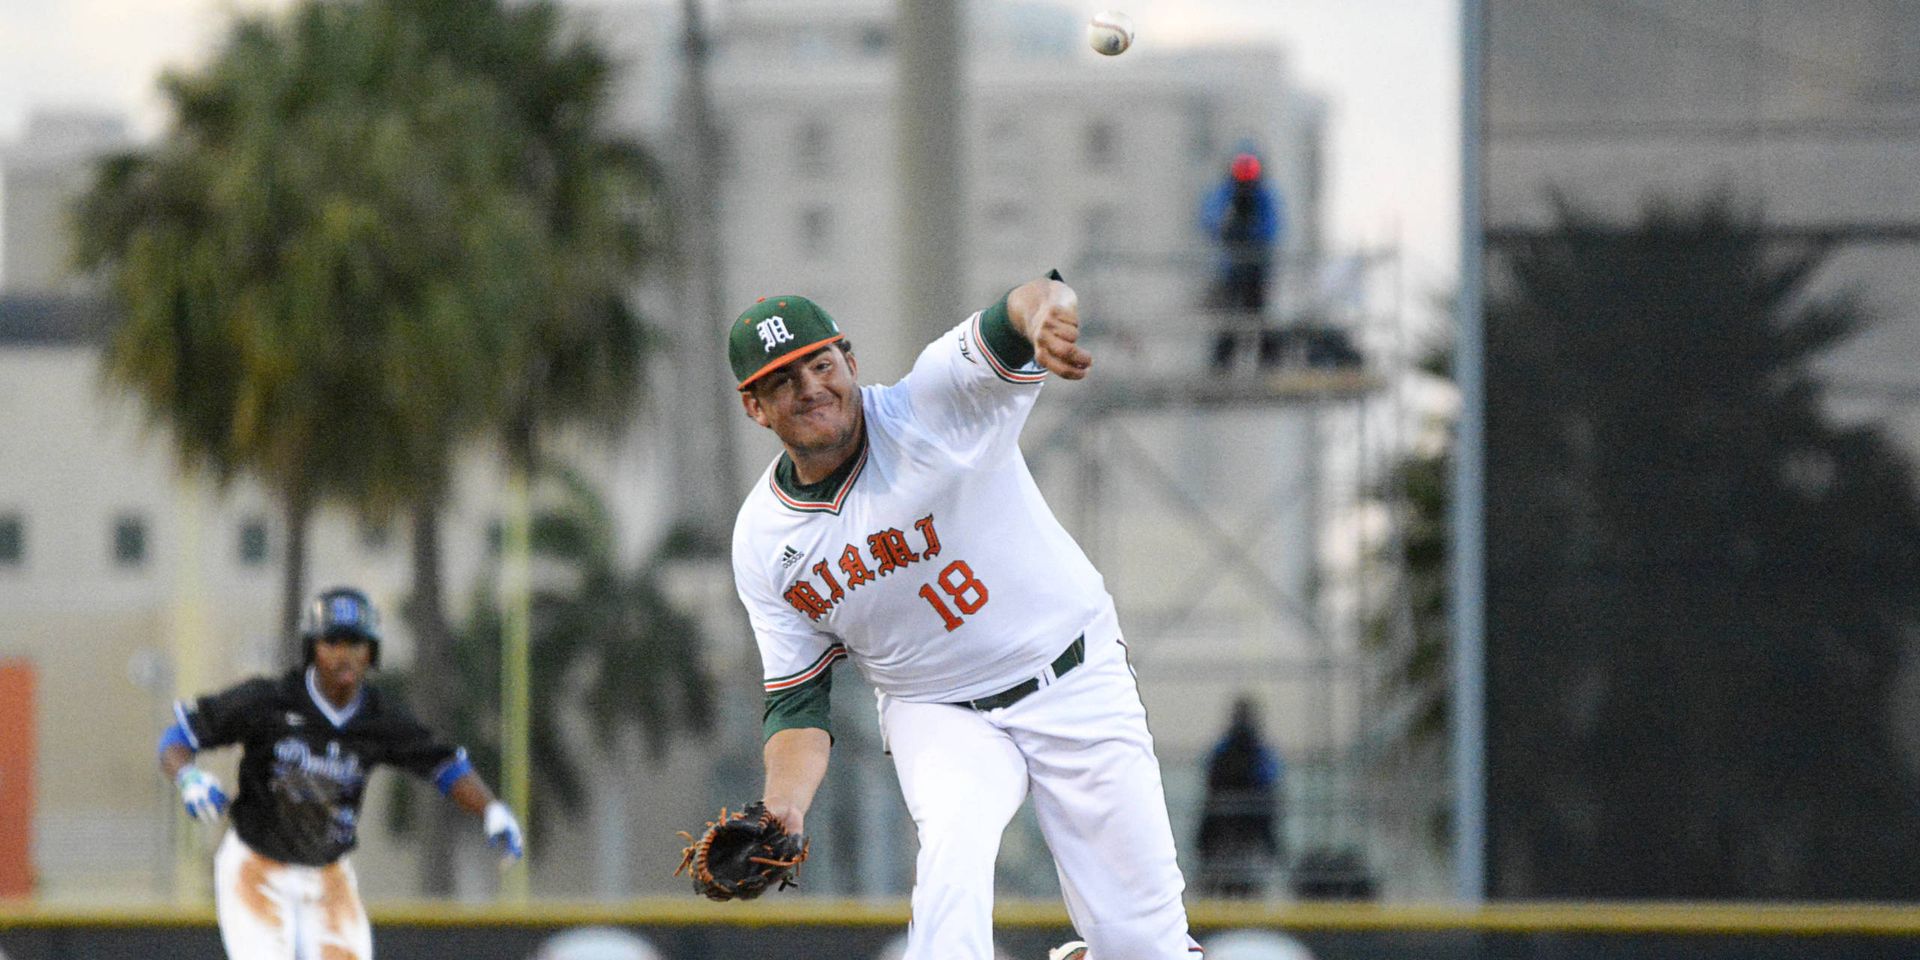 Miami Rallies Once Again, Falls to Duke in Extras